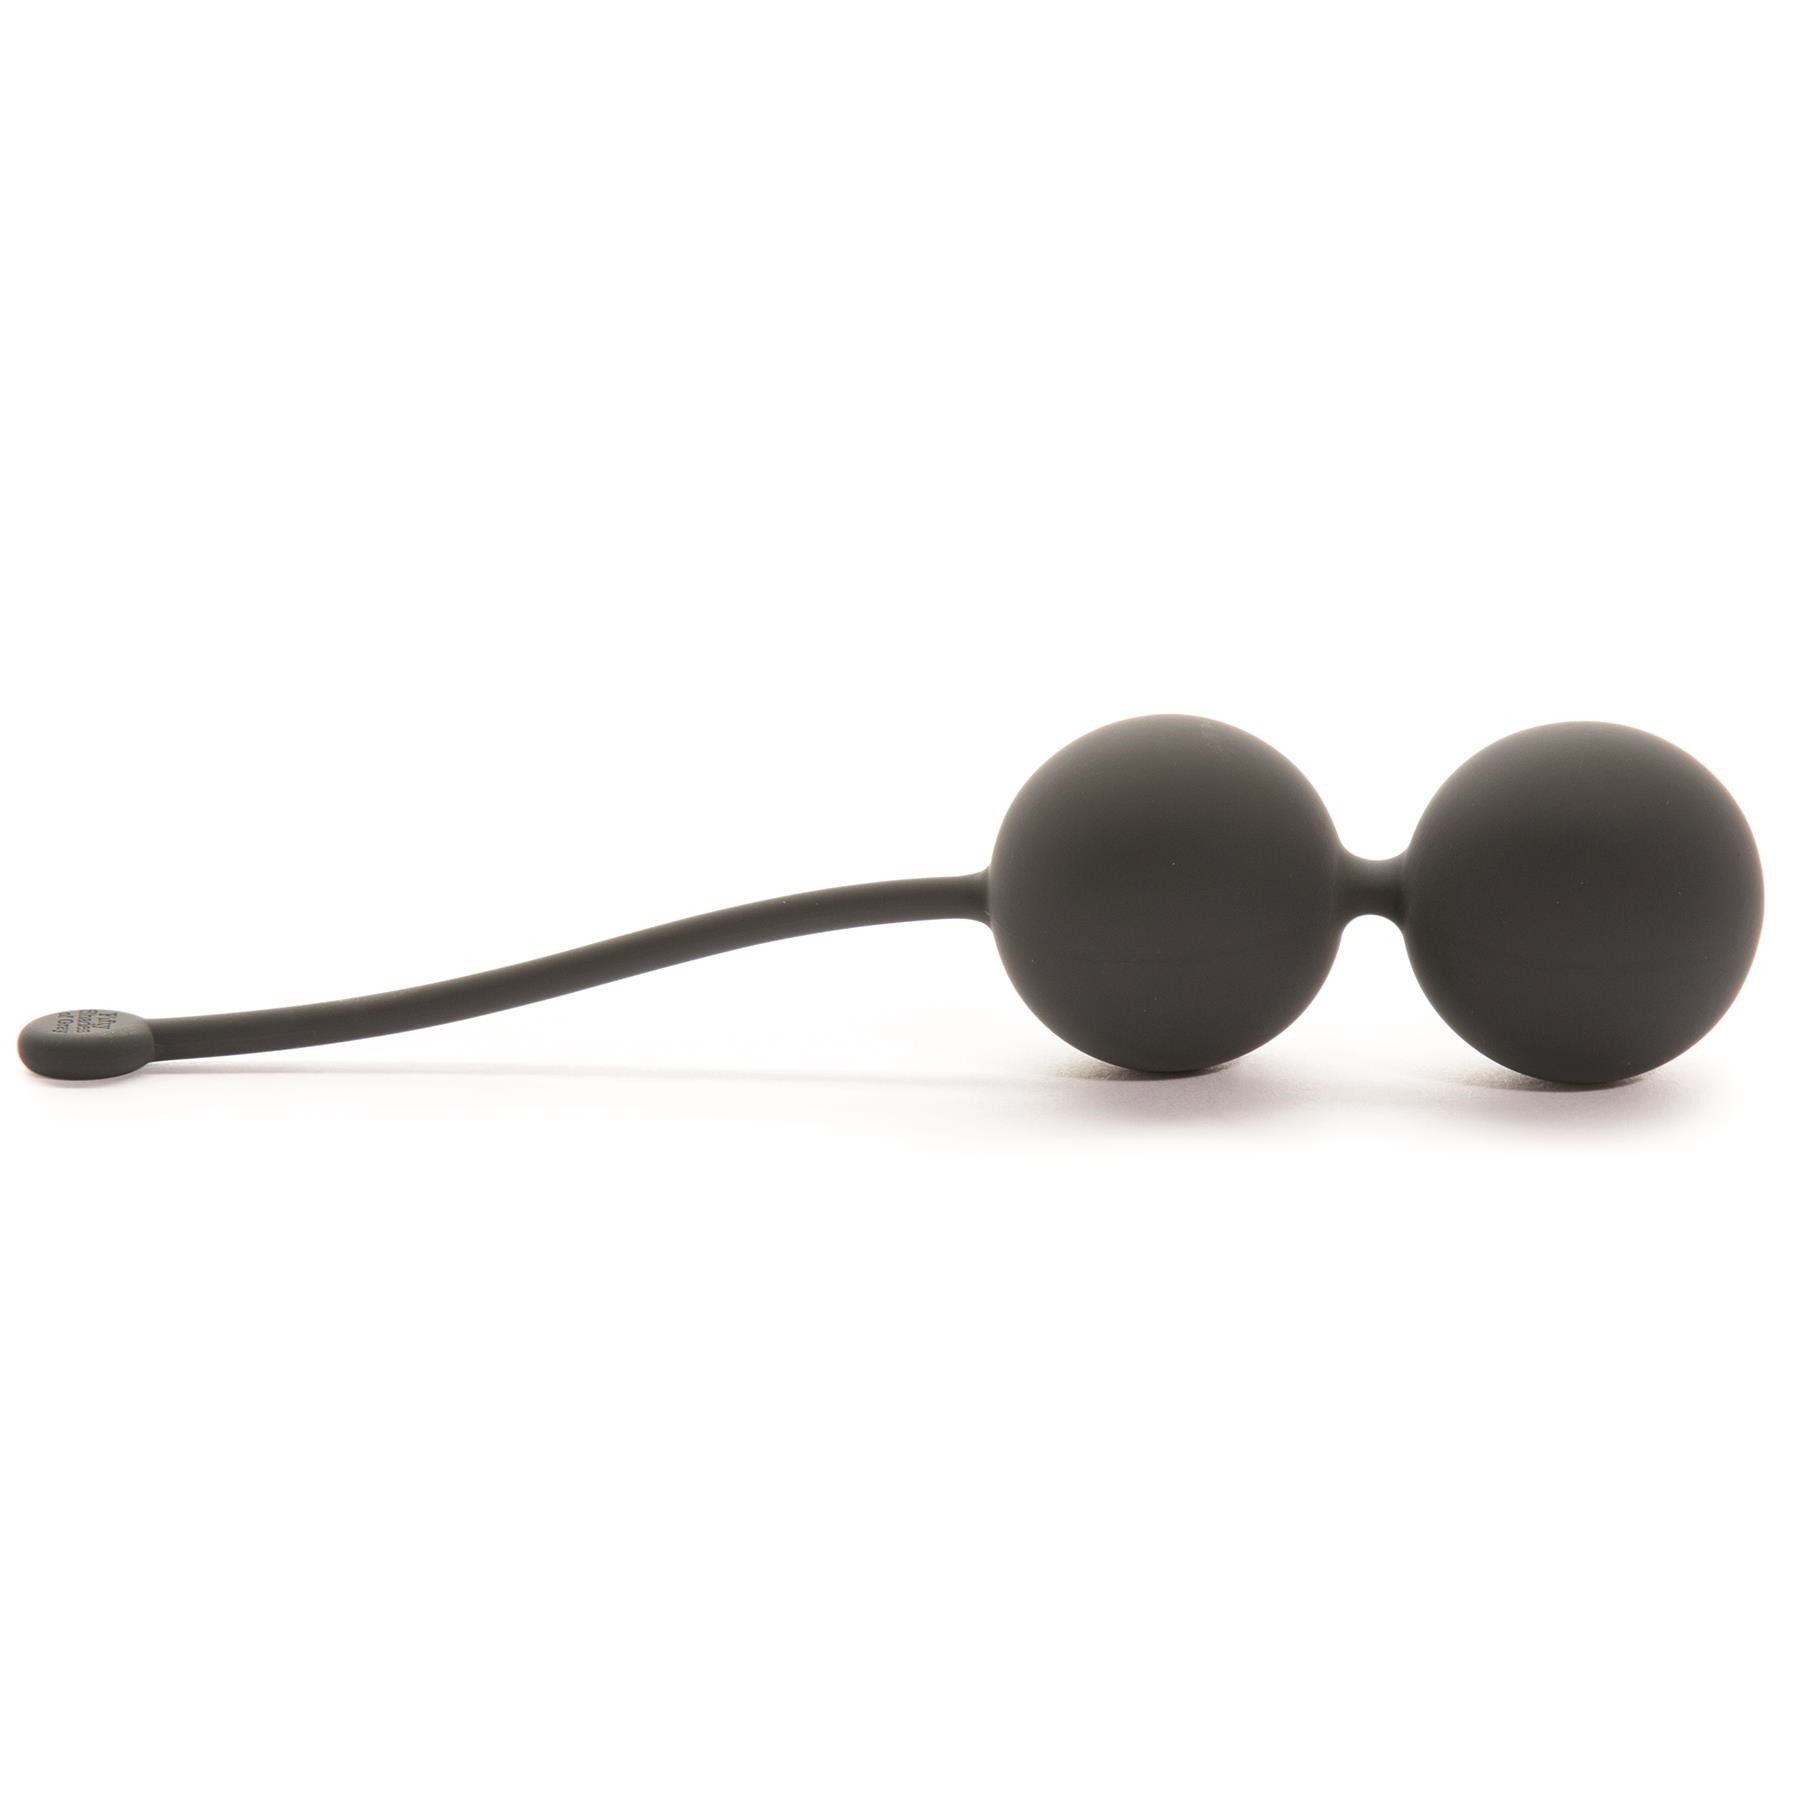 Fifty Shades of Grey Tighten and Tense Jiggle Balls Product Shot #2